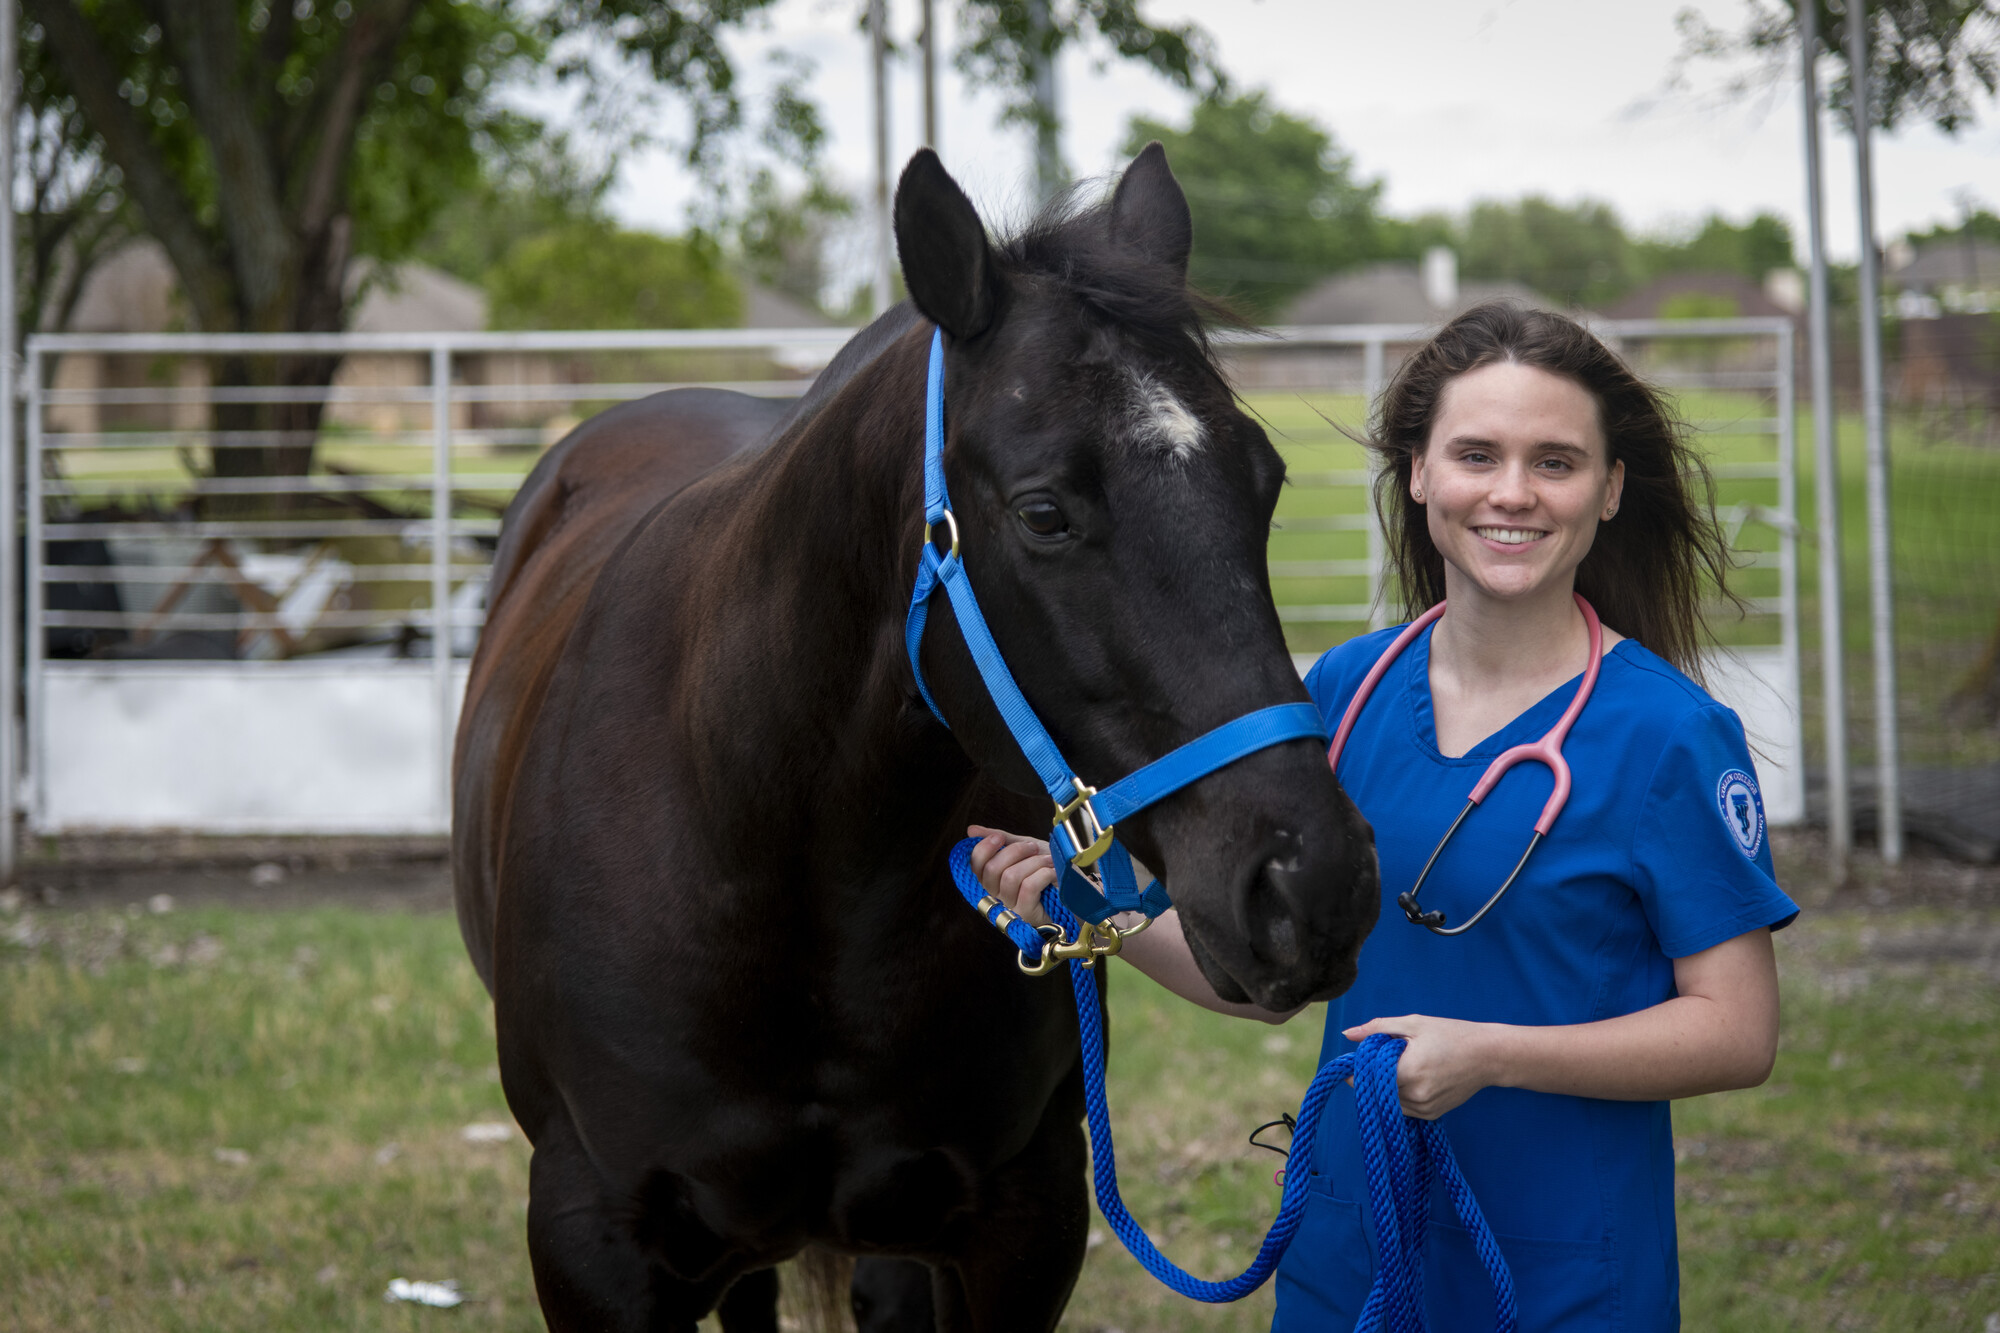 Vet tech student with horse